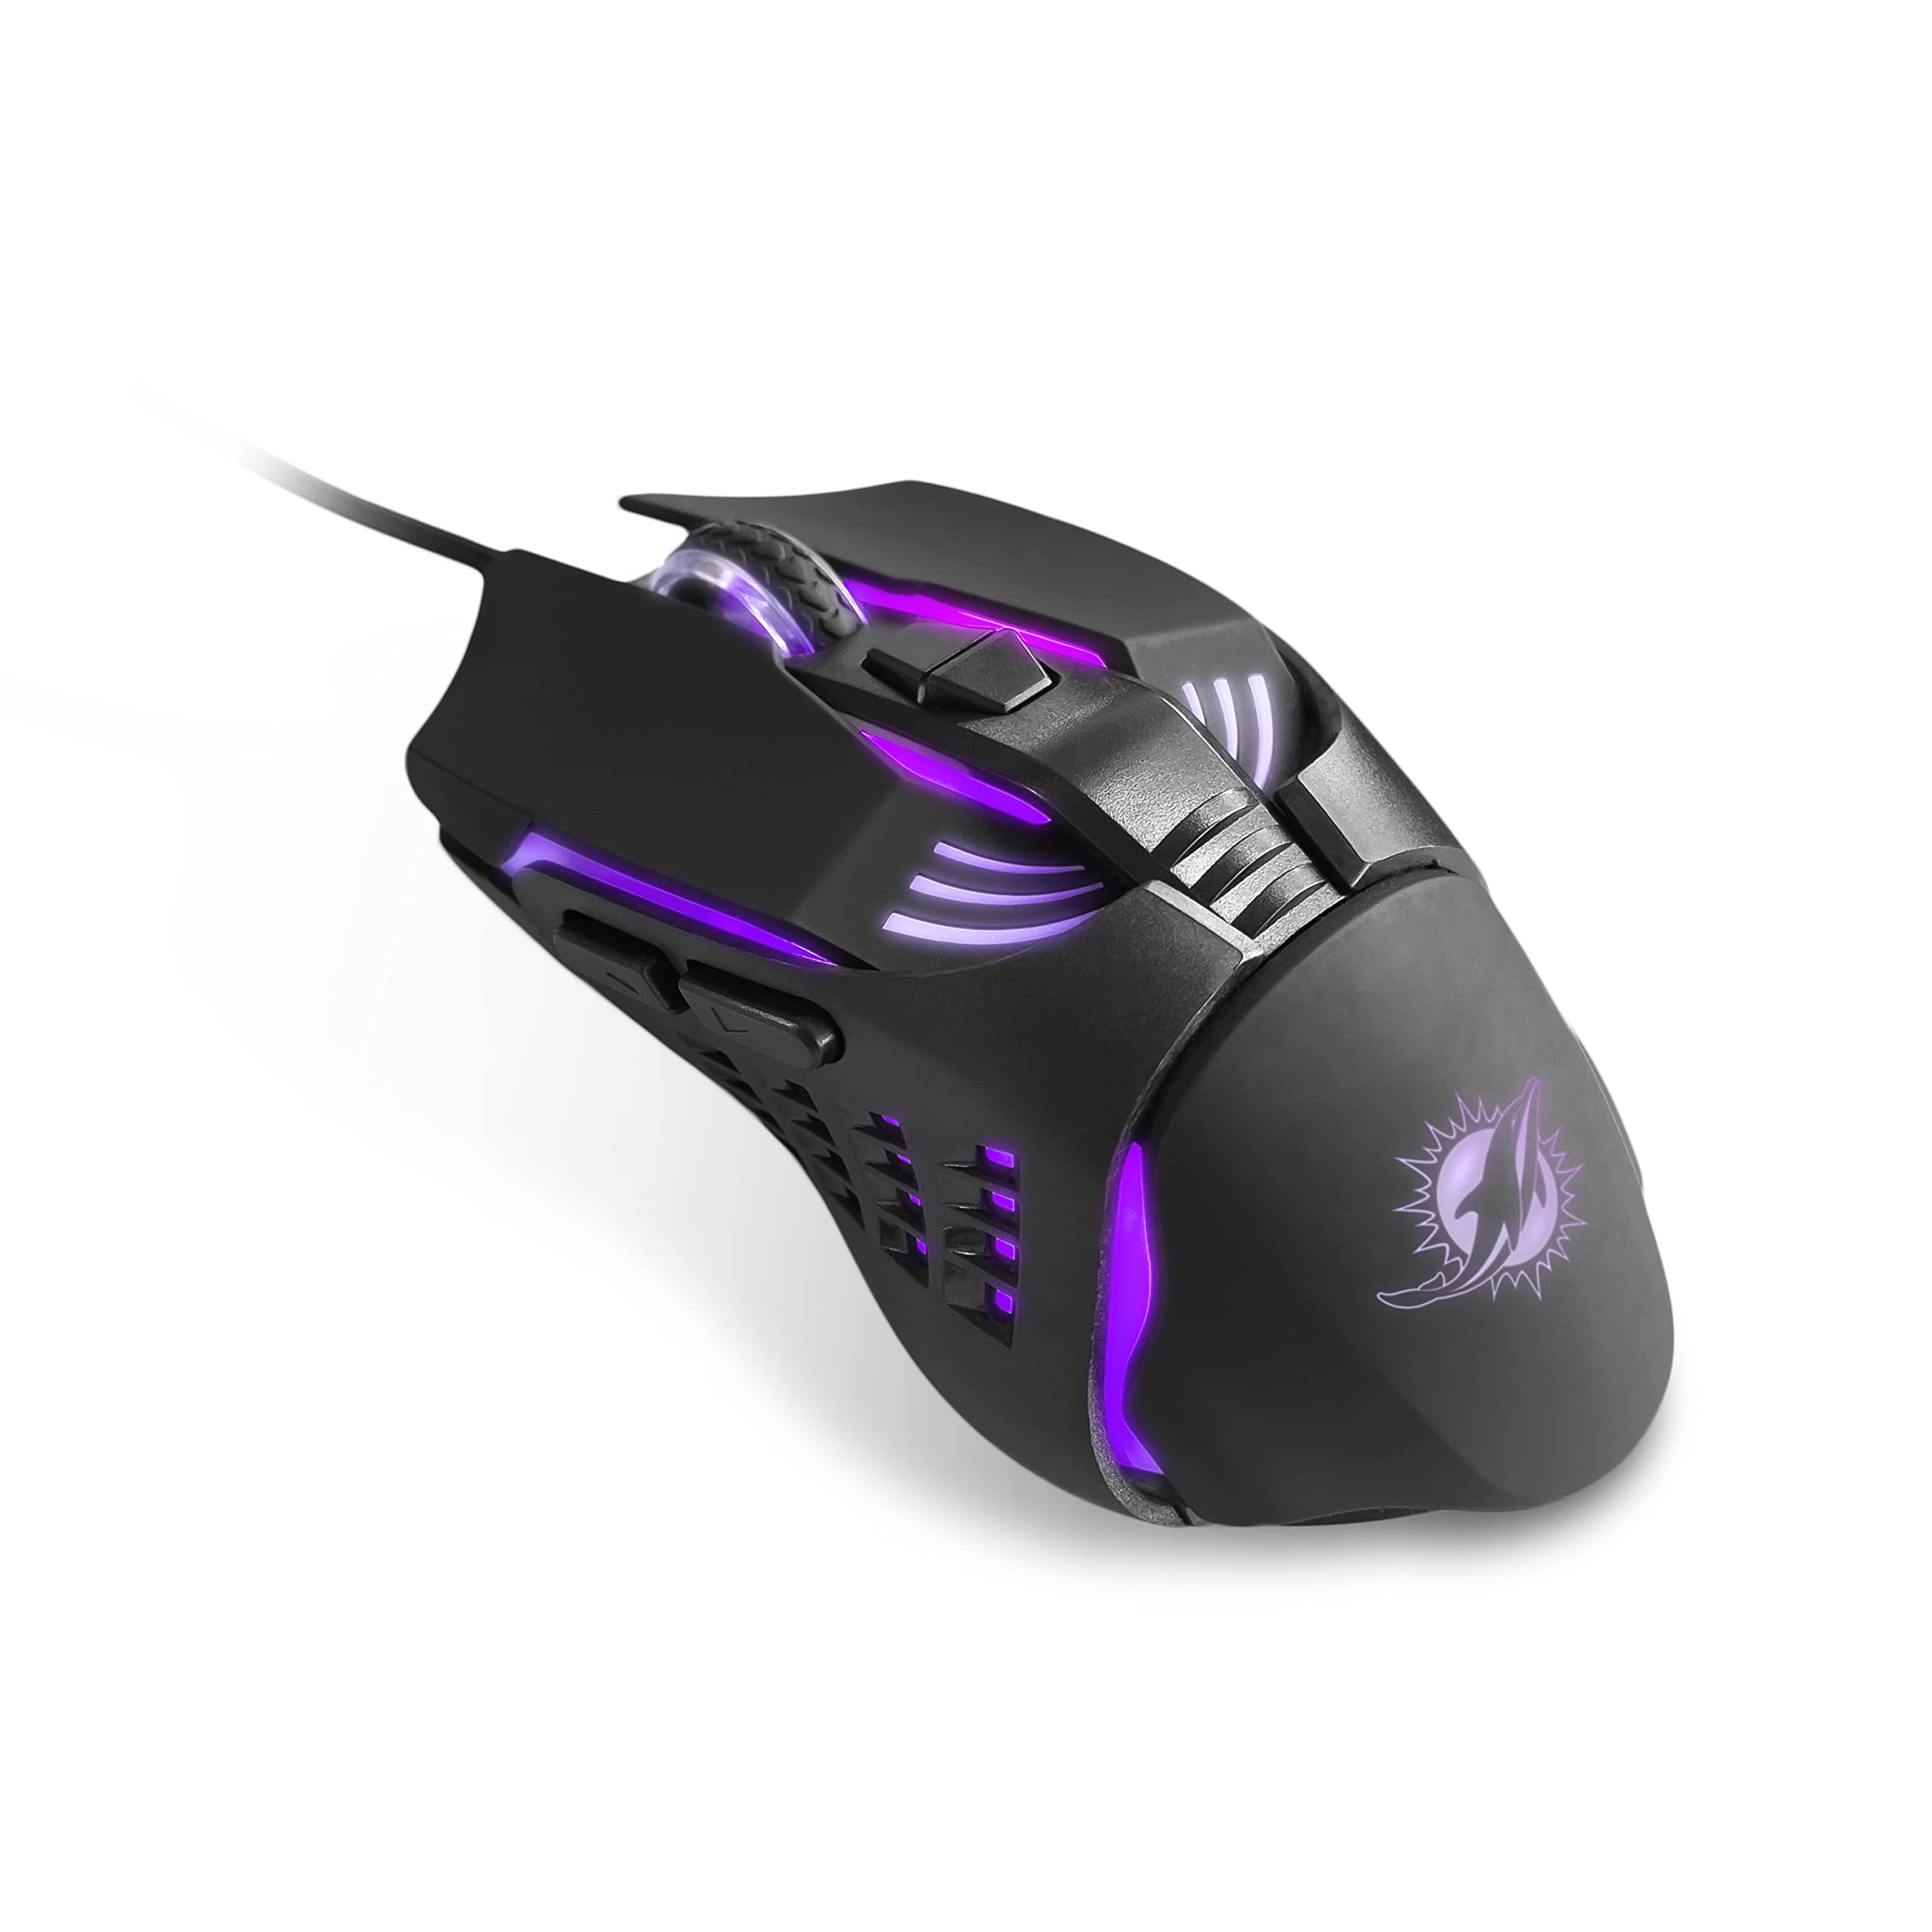 SOAR NFL Gaming Mouse V3, Miami Dolphins